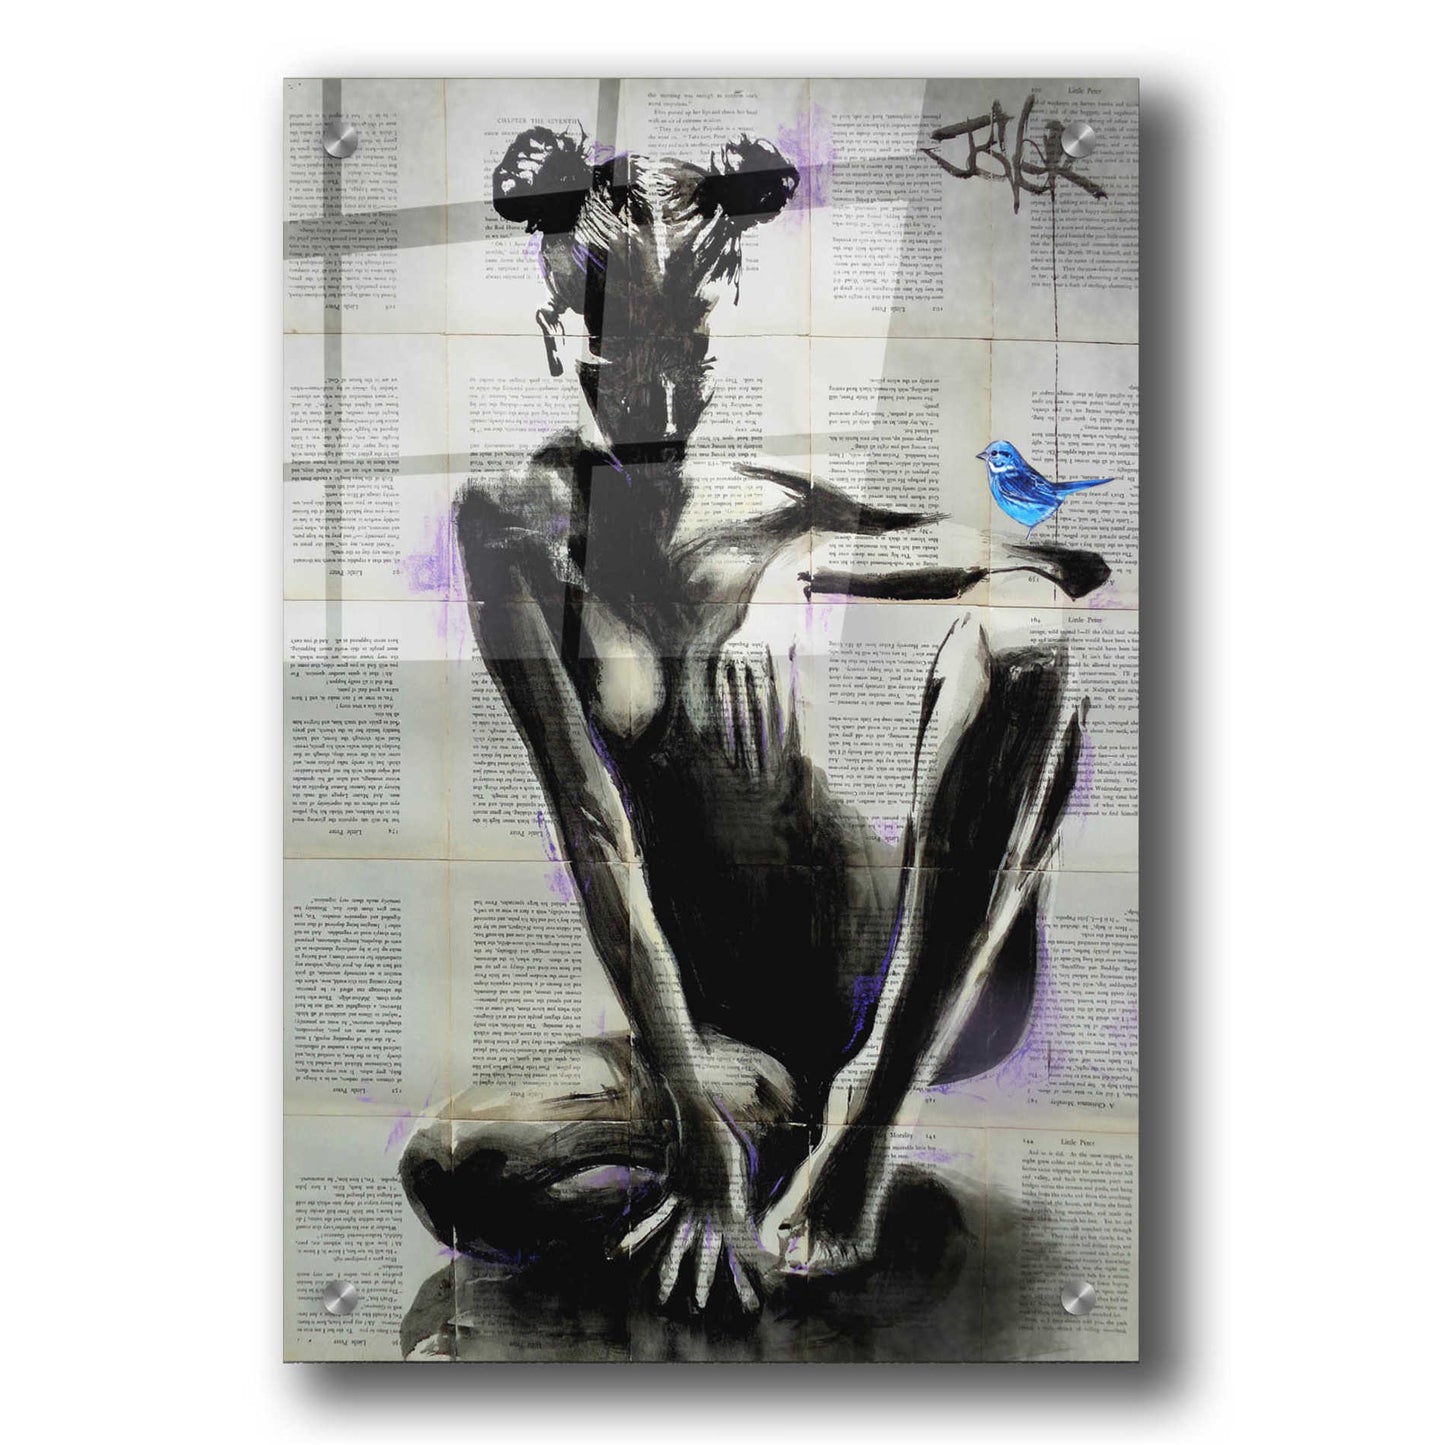 Epic Art 'Mischief And Hope' by Loui Jover Acrylic Glass Wall Art,24x36